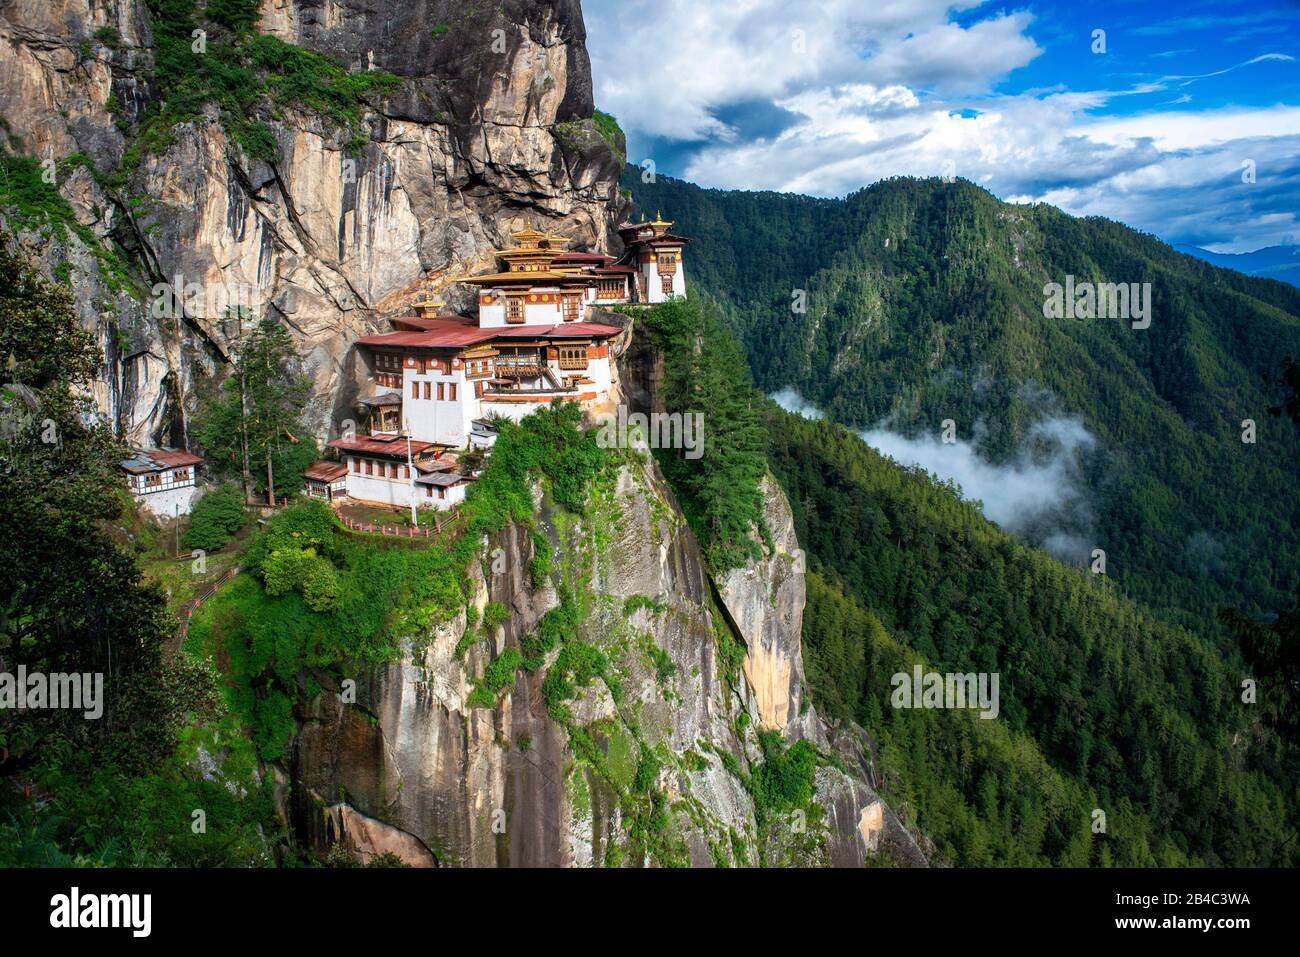 Taktsang Goemba or Tigers nest monastery in Paro valley, Bhutan, Asia. Paro Taktsang or Taktsang Palphug Monastery and the Tiger's Nest is a prominent Stock Photo